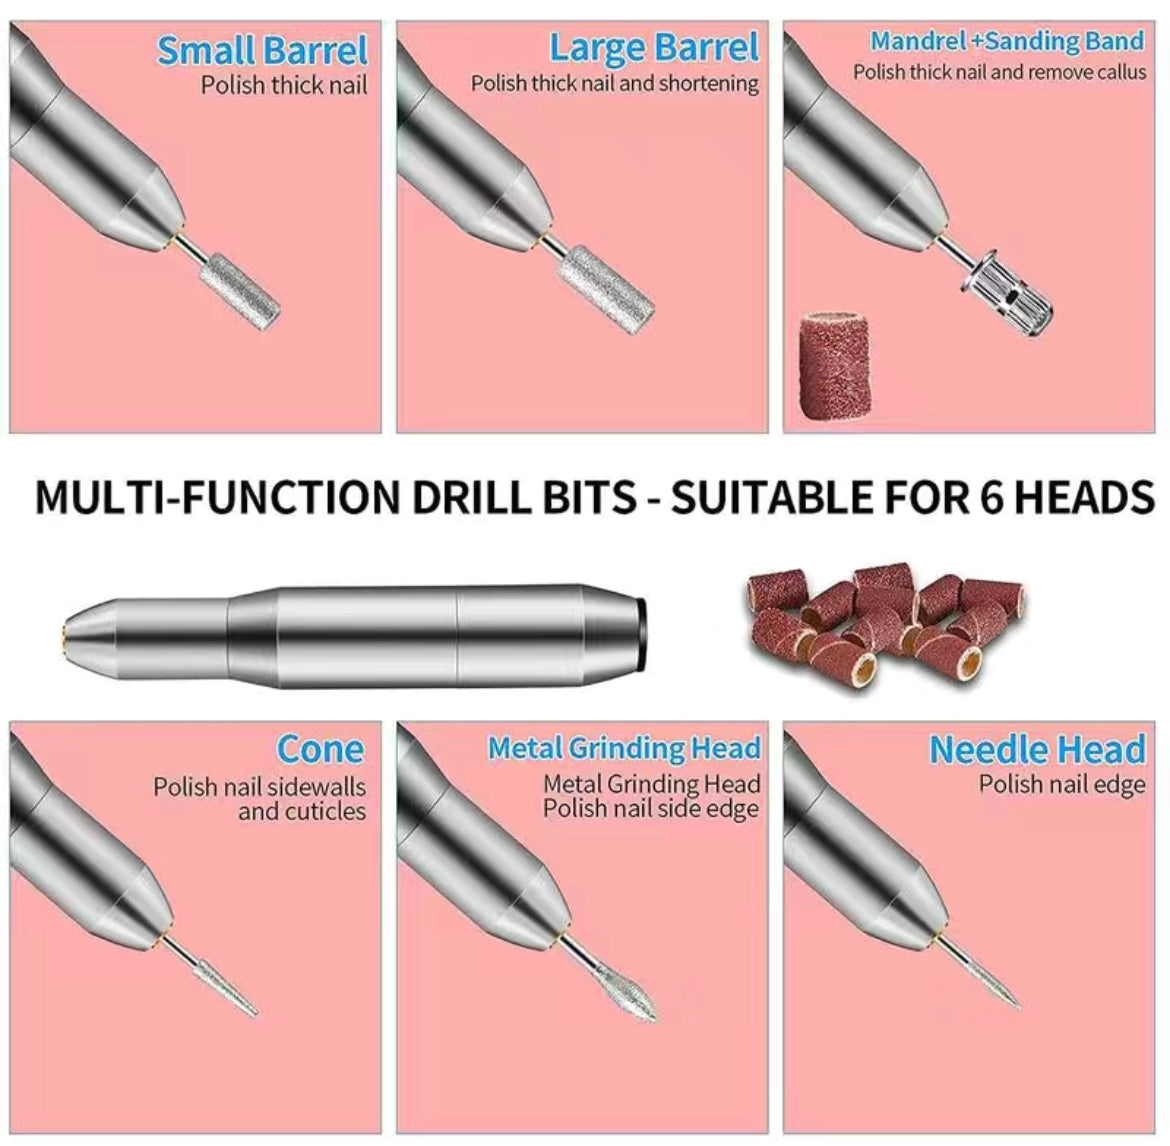 Electric Nail Drill Set,DELIFO Electric Portable Nail File Drills Kit With 6 Heads & 6 Sanding Bands, Professional Manicure Pedicure Machine Tools For Acrylic Nails, Polishing Shape, USB Rechargeable